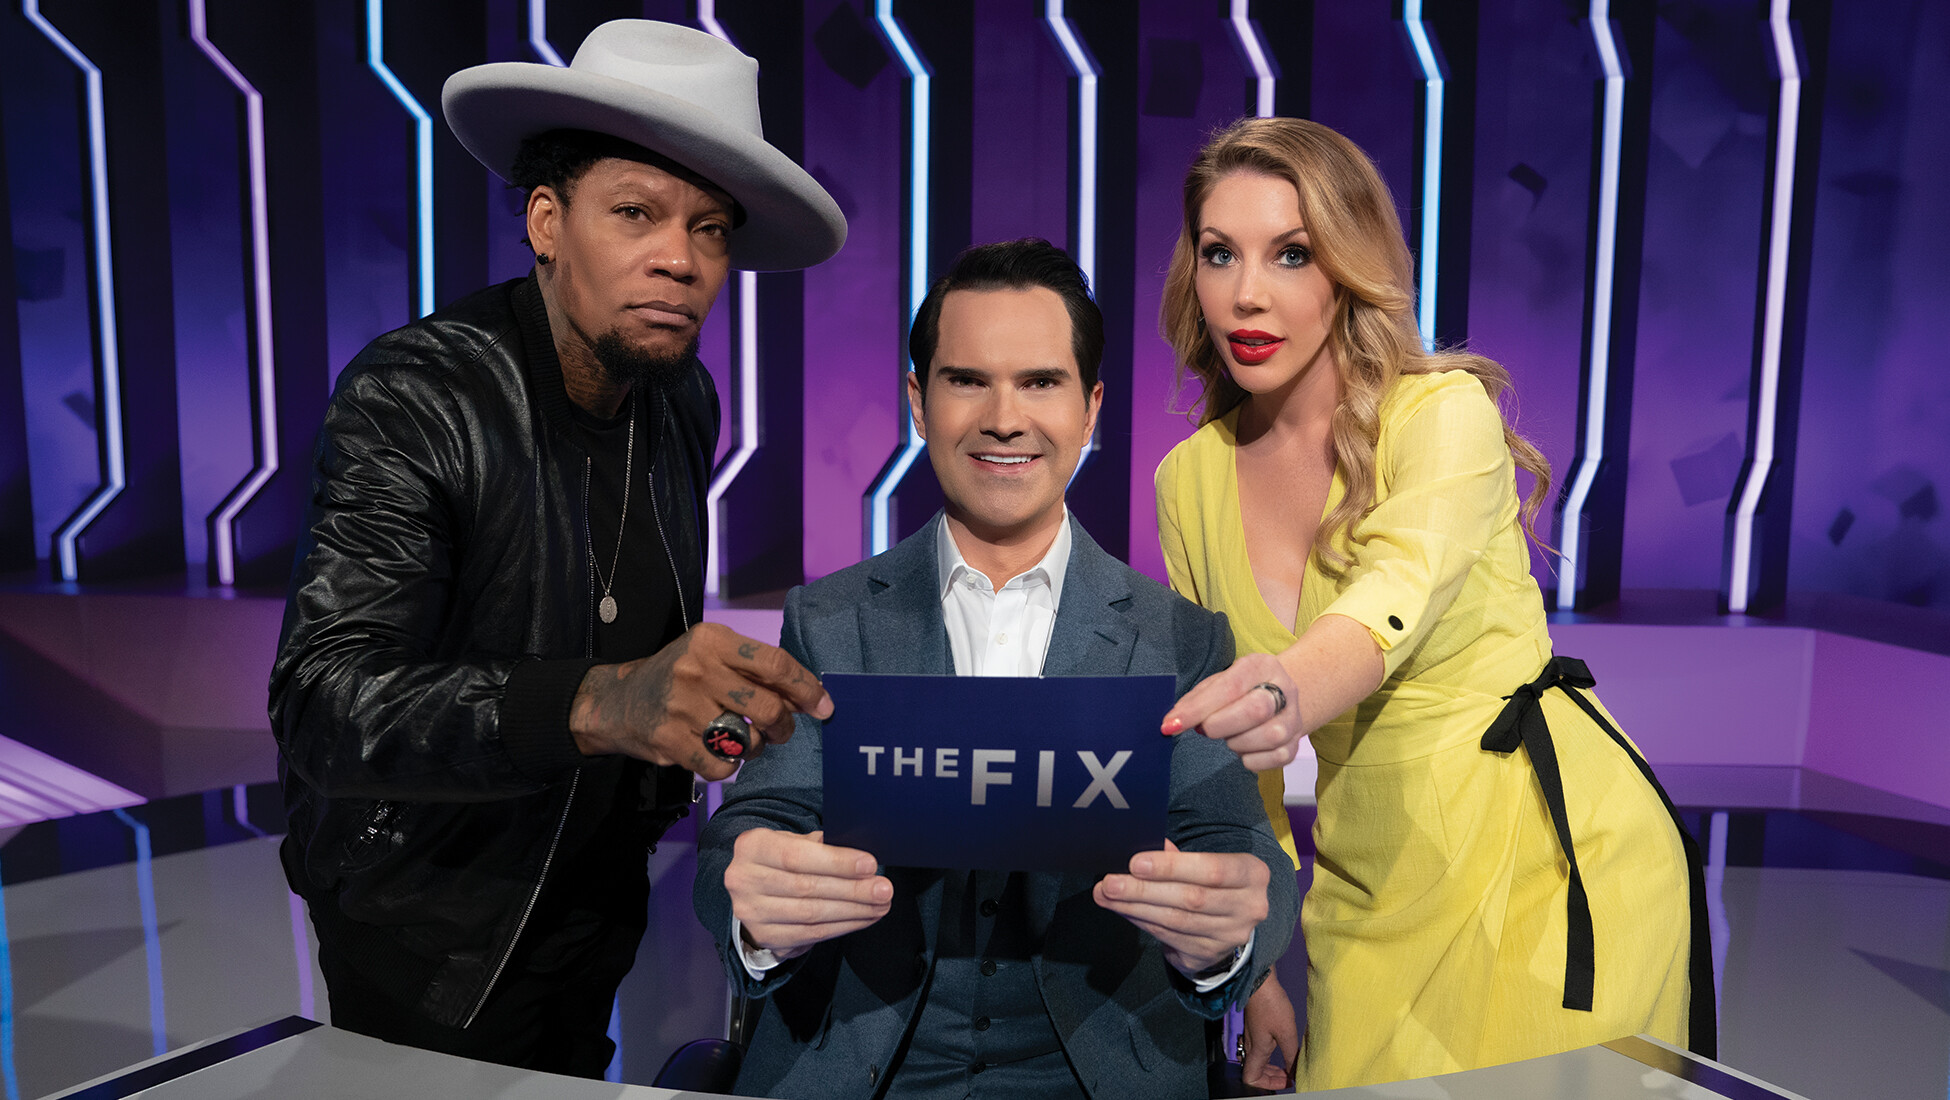 Jimmy Carr: J.Carr, D.L. Hughley and K.Ryan star in Netflix's 'The Fix', New comedy panel show, American television. 1950x1100 HD Wallpaper.